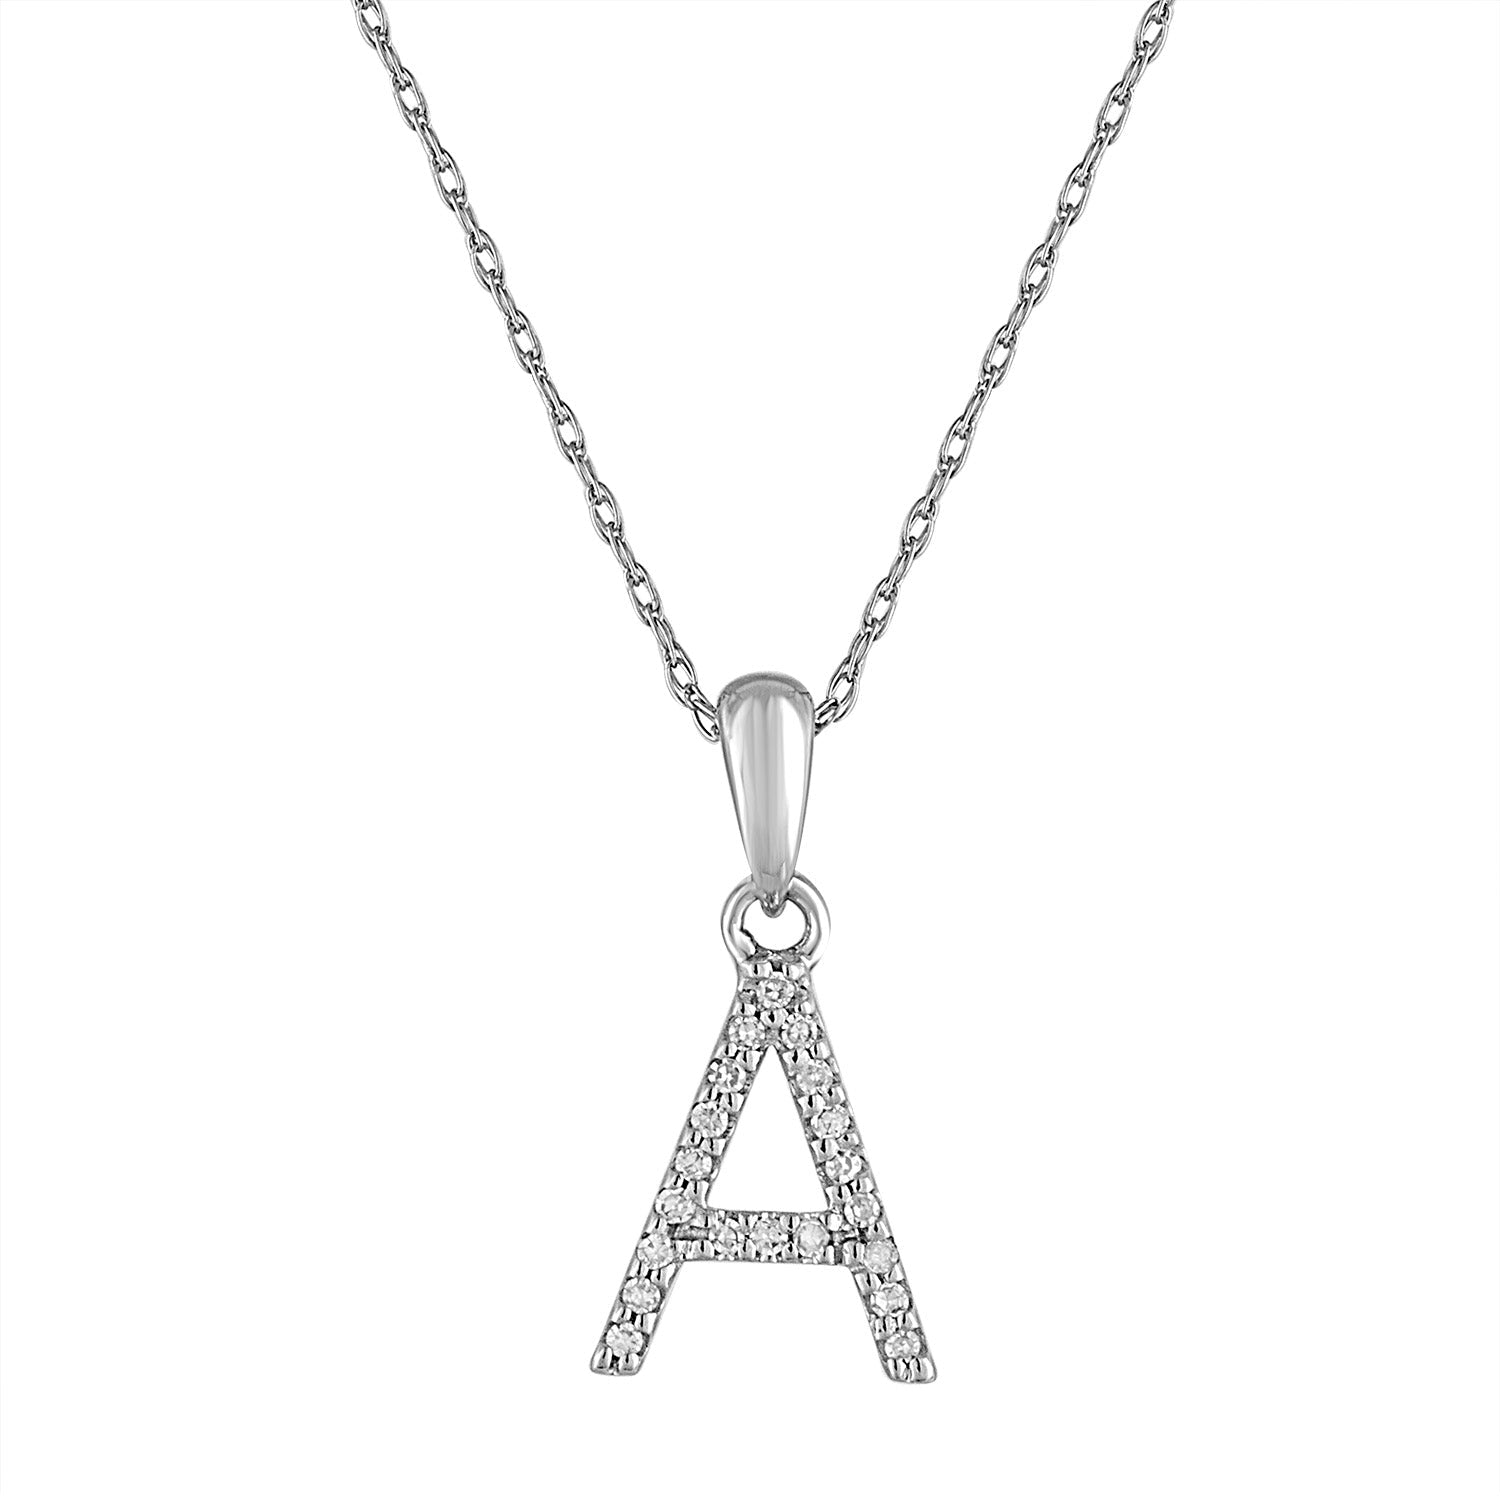 14k White Gold & Diamond Initial Necklace with Rope Chain